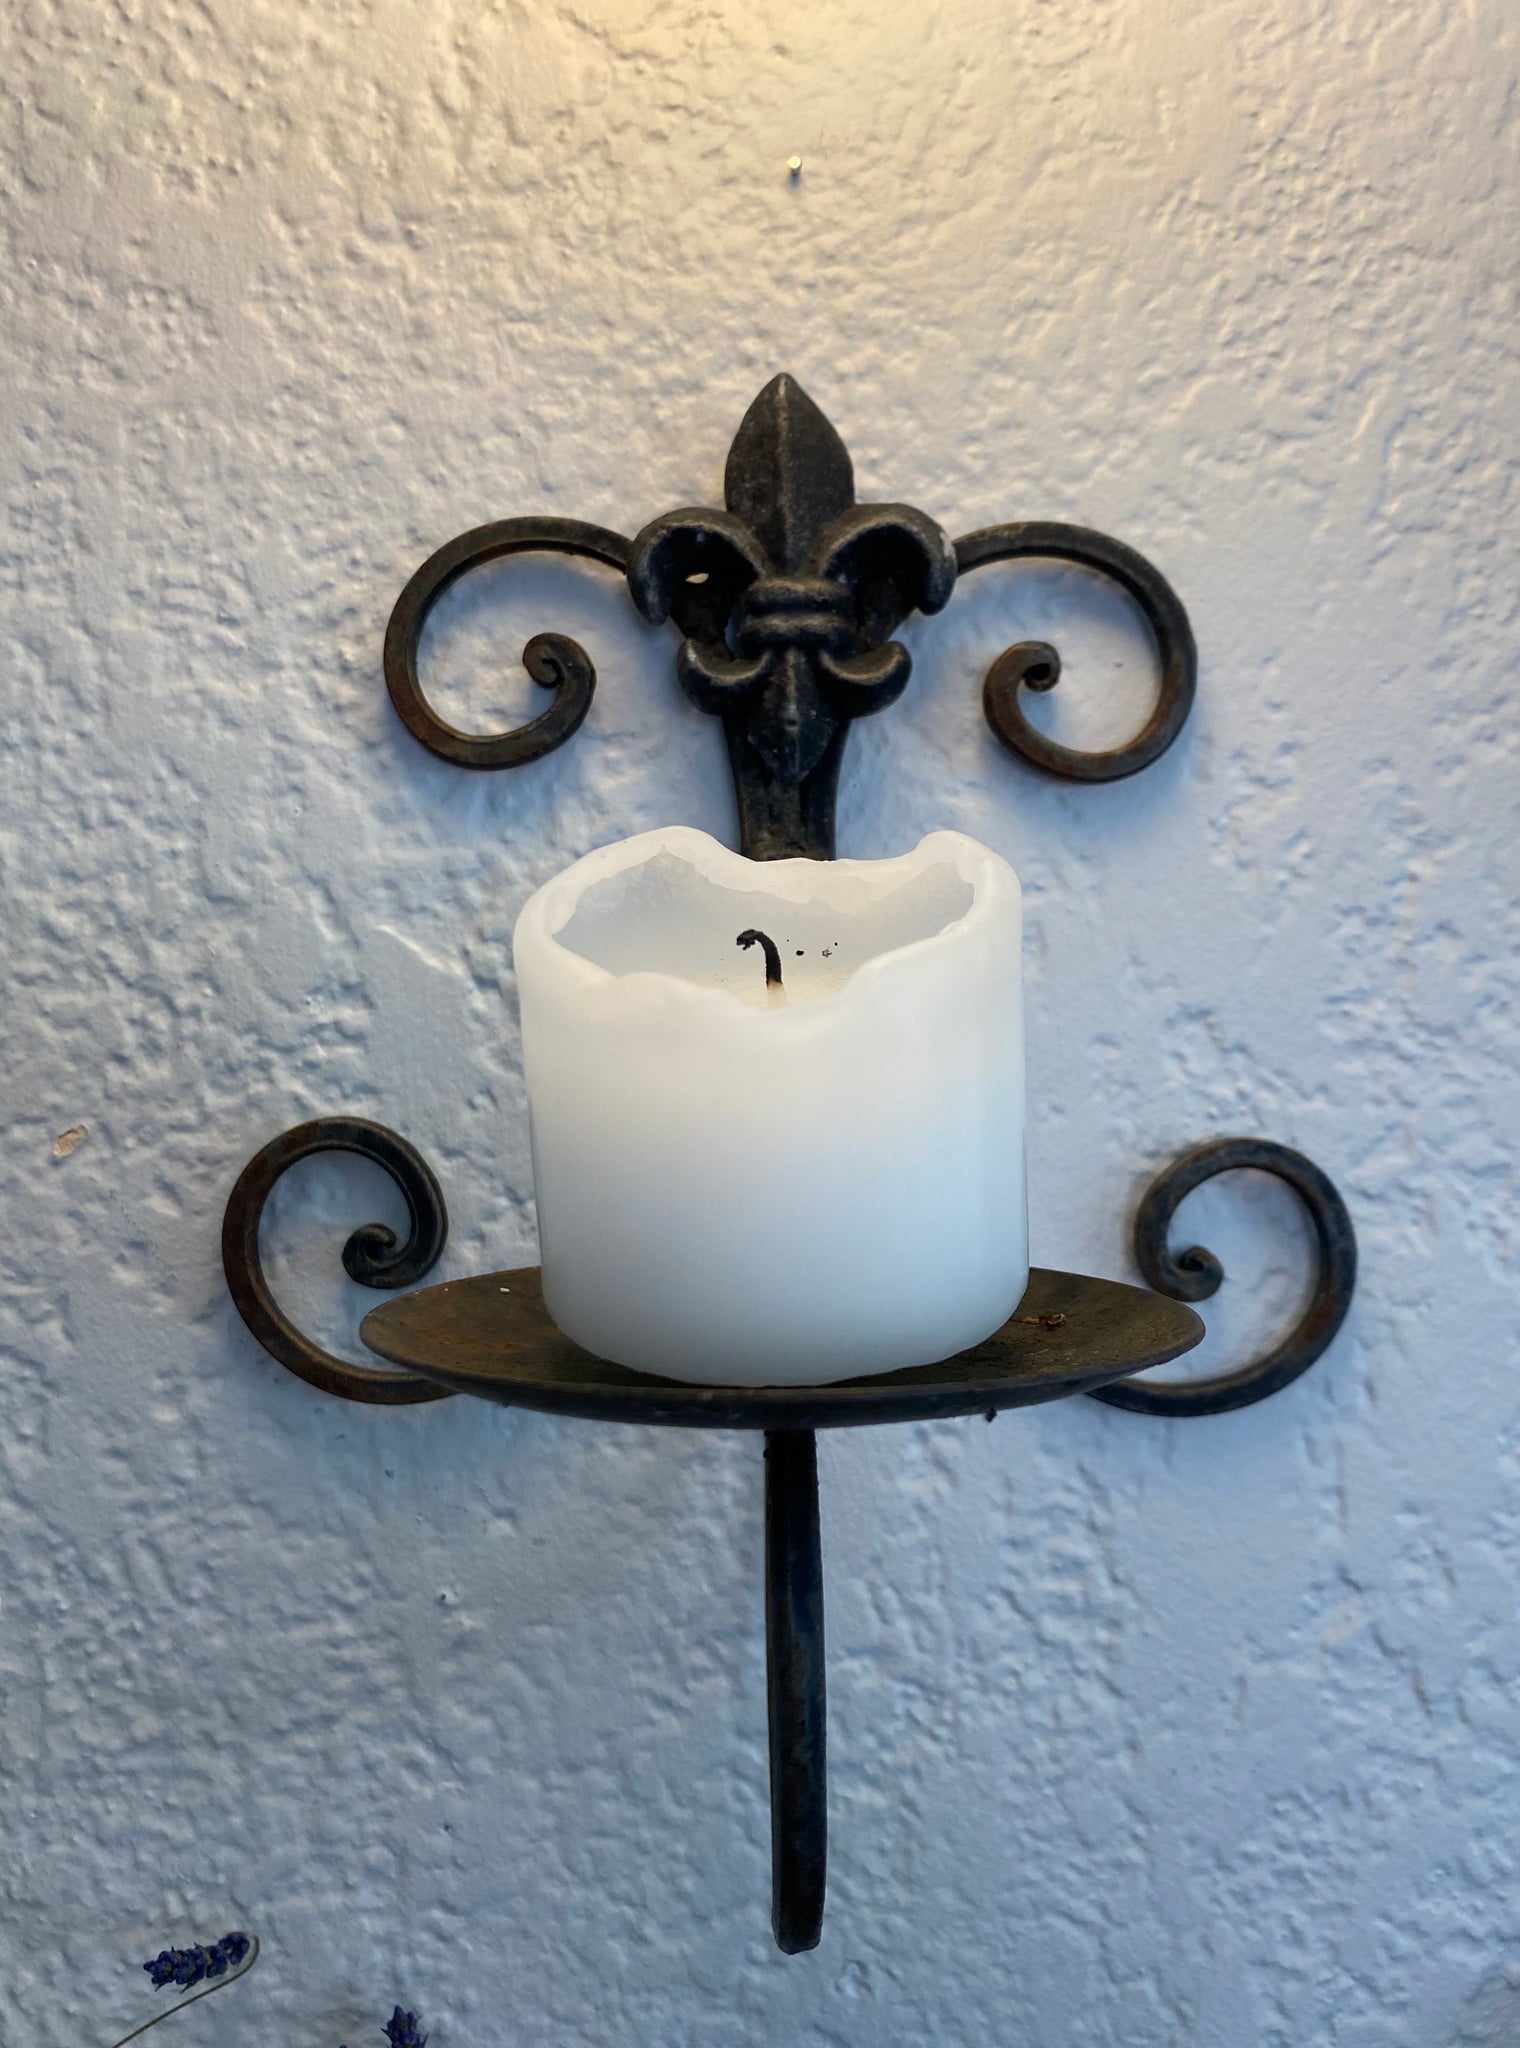 Black Wrought Iron Scroll Wall Candle Sconce w/ Fleur de Lis